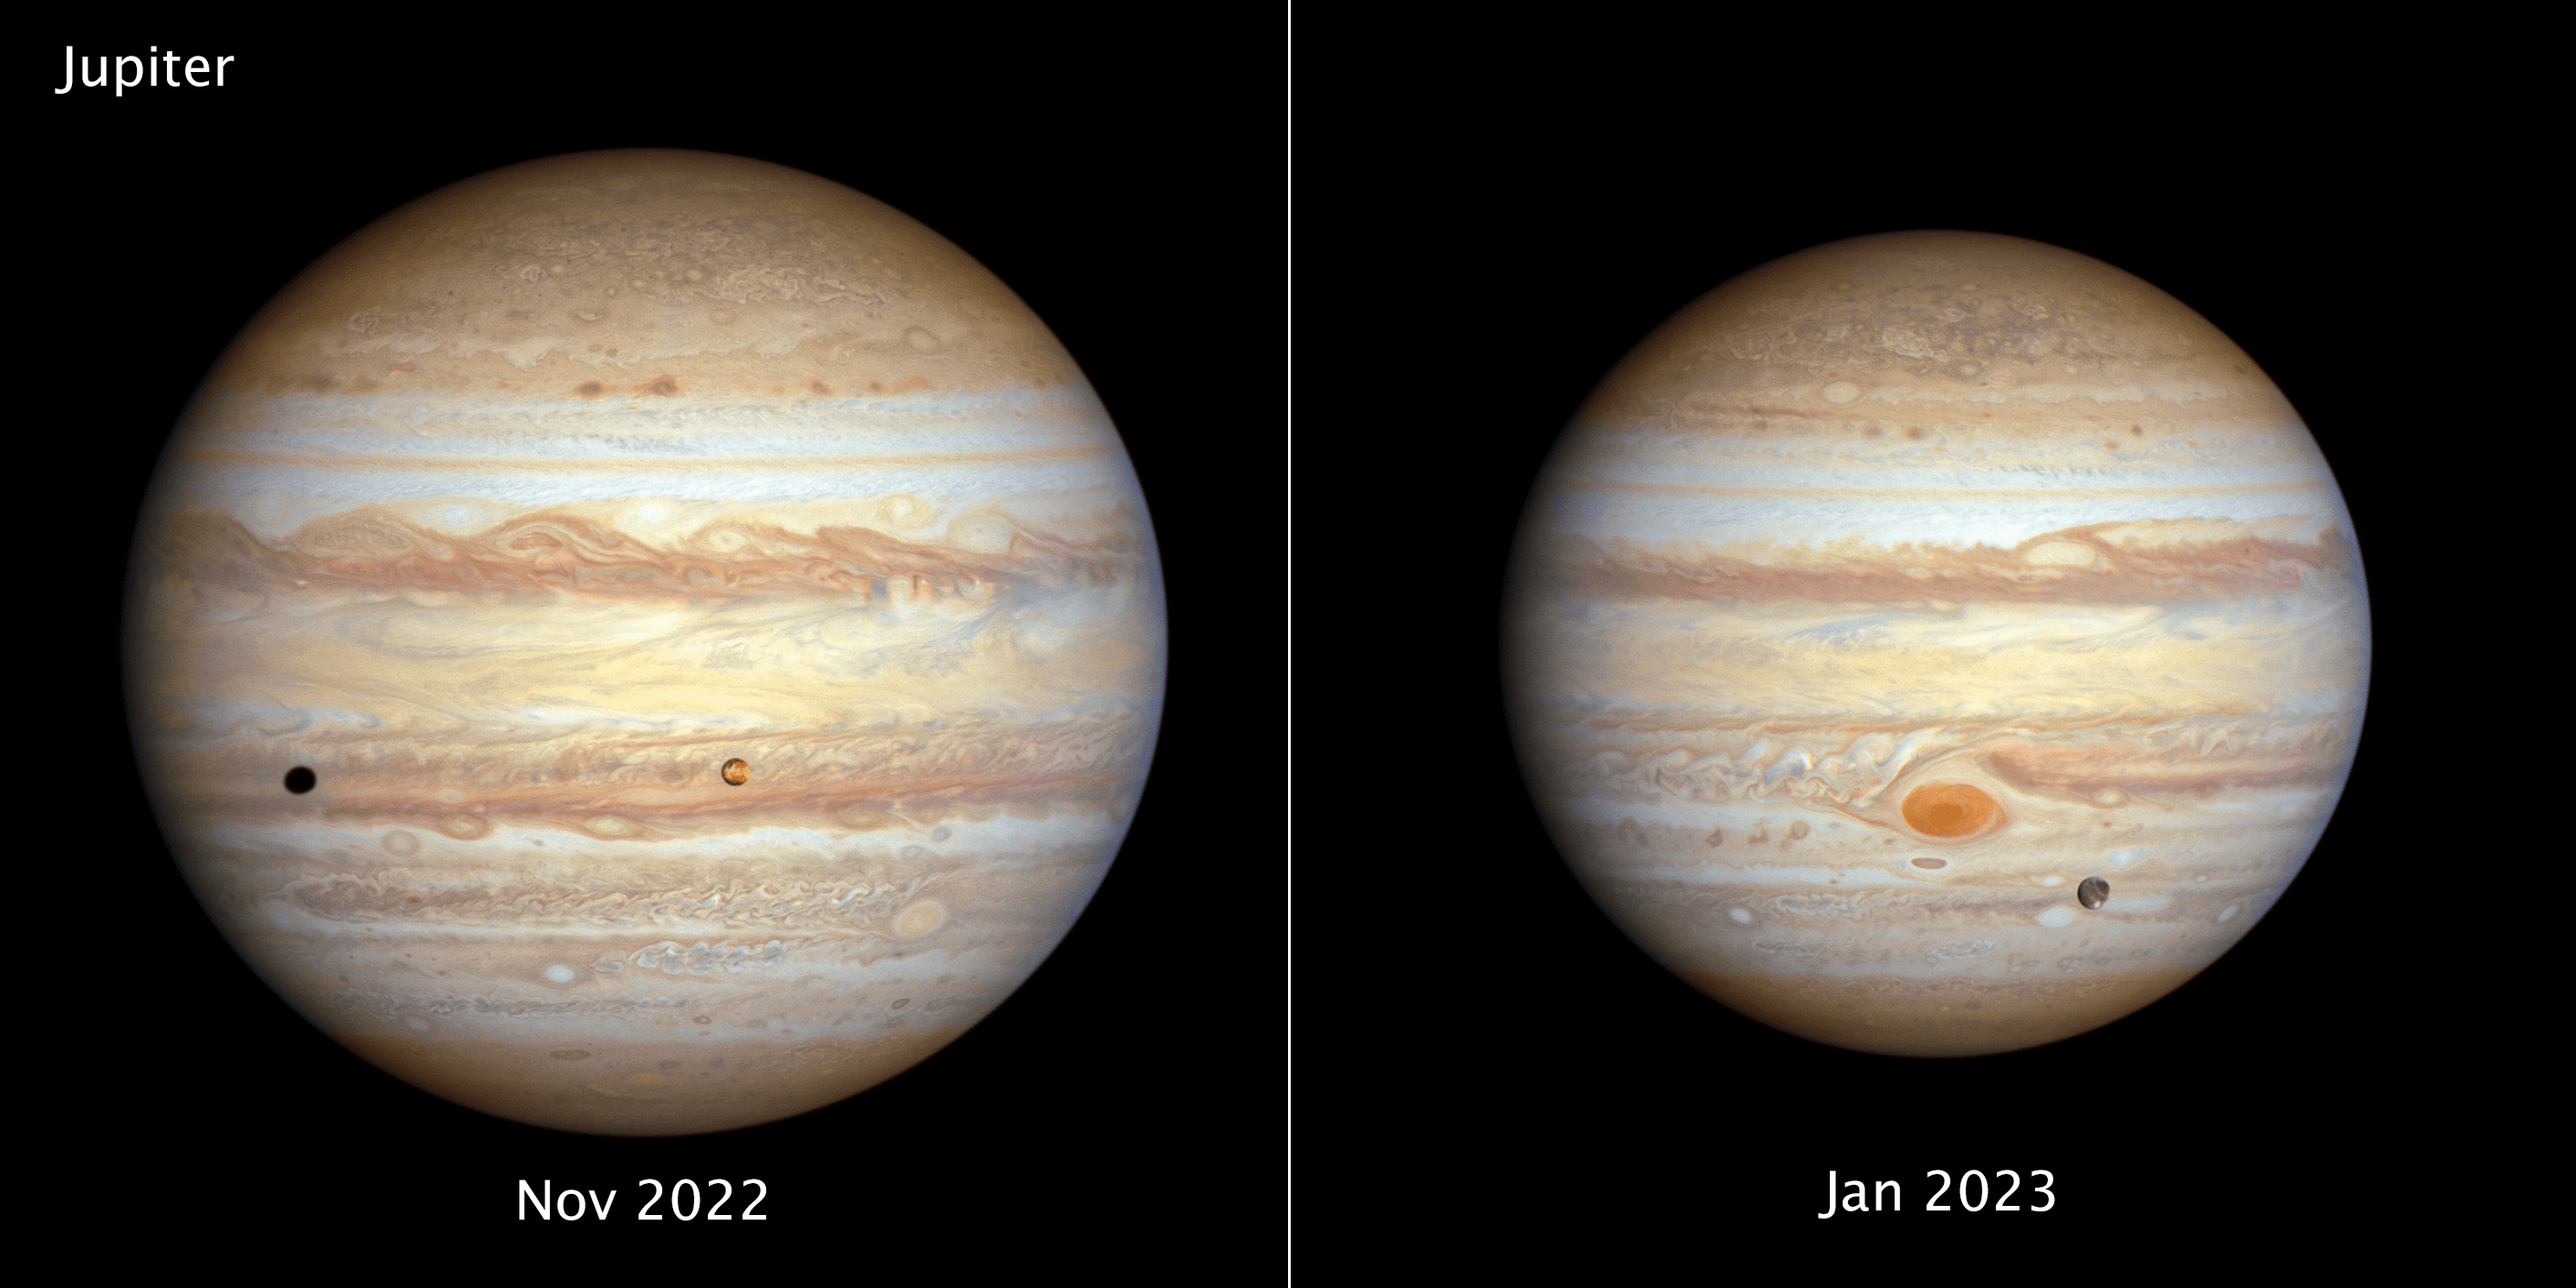 2 Jupiter views. Left Nov 2022: rusty-orange, yellow, and cream cloud bands with whitish ovals. Io is right of center, casting black shadow to far left. Right Jan 2023: Great Red Spot is prominent. Ganymede is gray orb crossing Jupiter’s face.